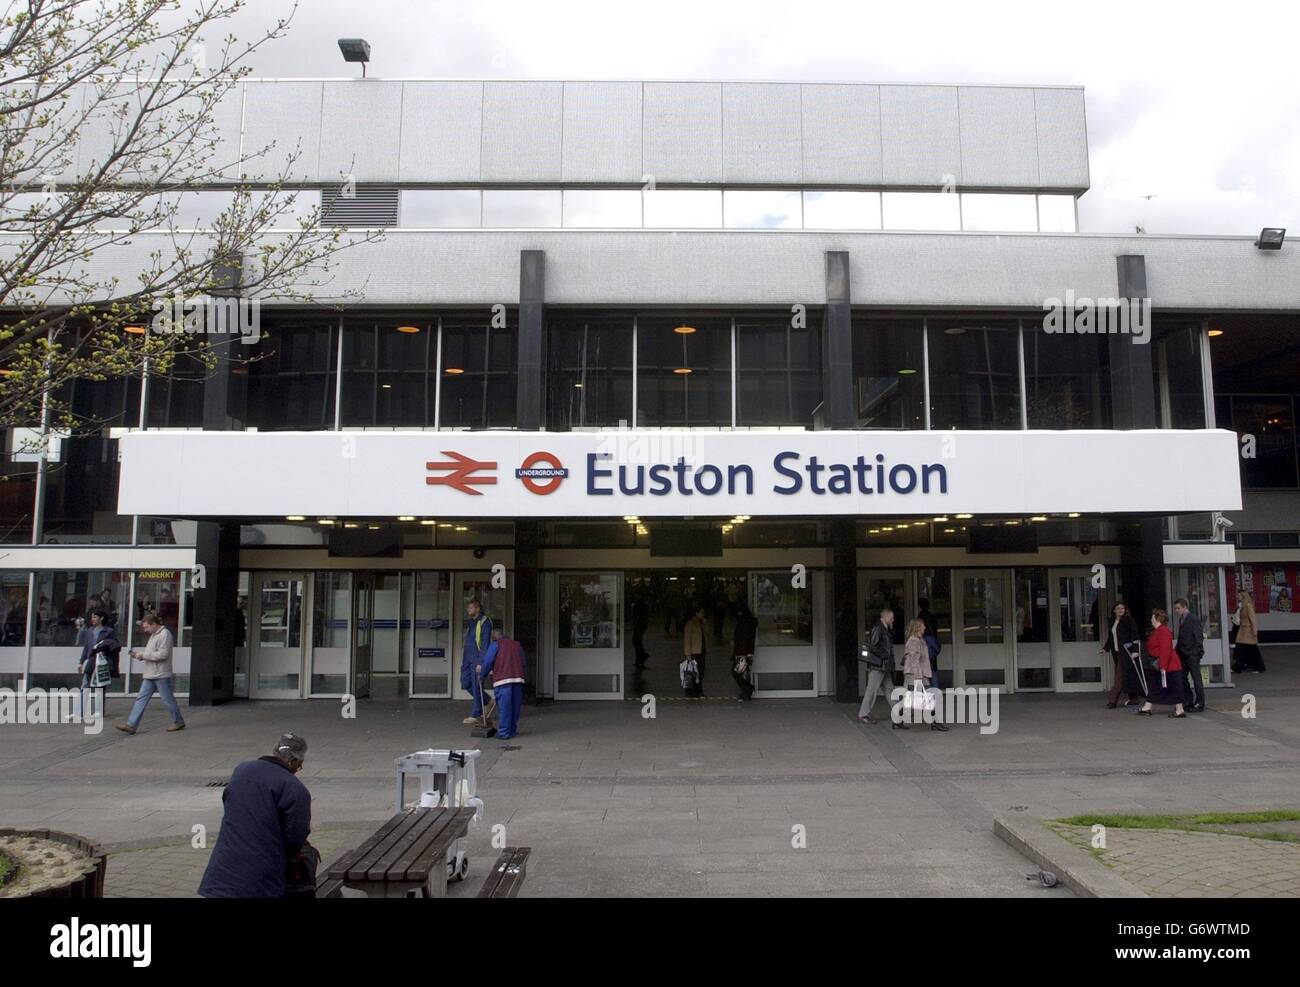 Euston, one of London's most important mainline stations, opened in 1837 as the terminus of the London and Birmingham Railway, later the London and North Western Railway (LNWR). Between 1963 and 1968, every trace of the old station was destroyed by British Railways. The construction of a new station building was carried out in conjunction with the electrification of the West Coast Main Line. The new station was opened by HM Queen in 1968. Today Euston Station serves the north and north-west of England and Scotland (including the Scotrail sleeper) and has a suburban line north to Watford. Stock Photo